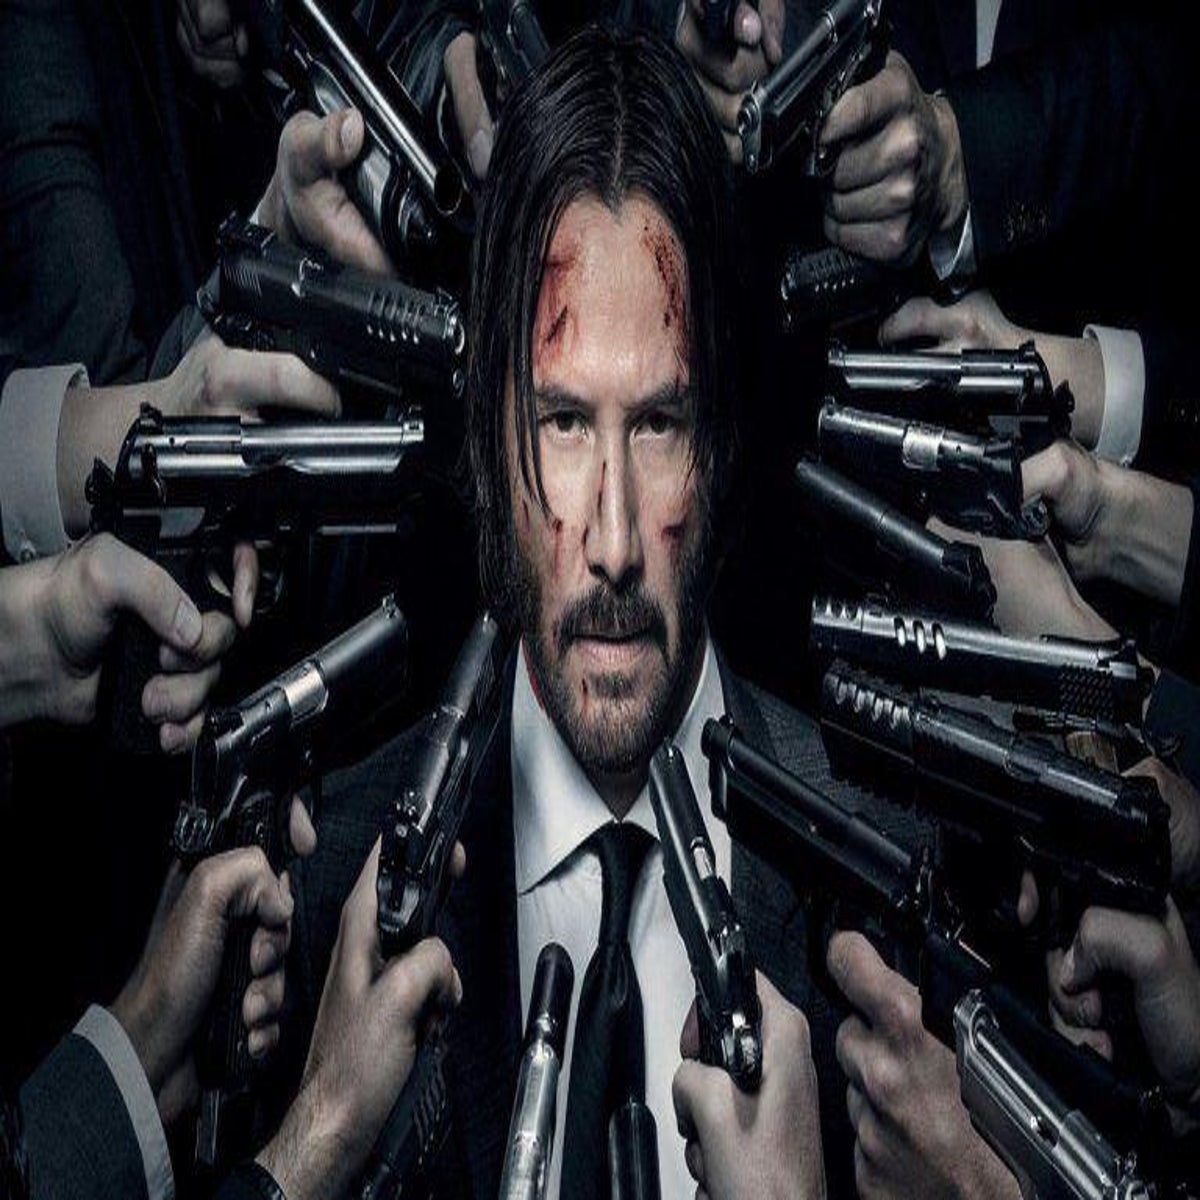 John Wick Chapter 3 cast: Is Halle Berry in the new John Wick movie?, Films, Entertainment